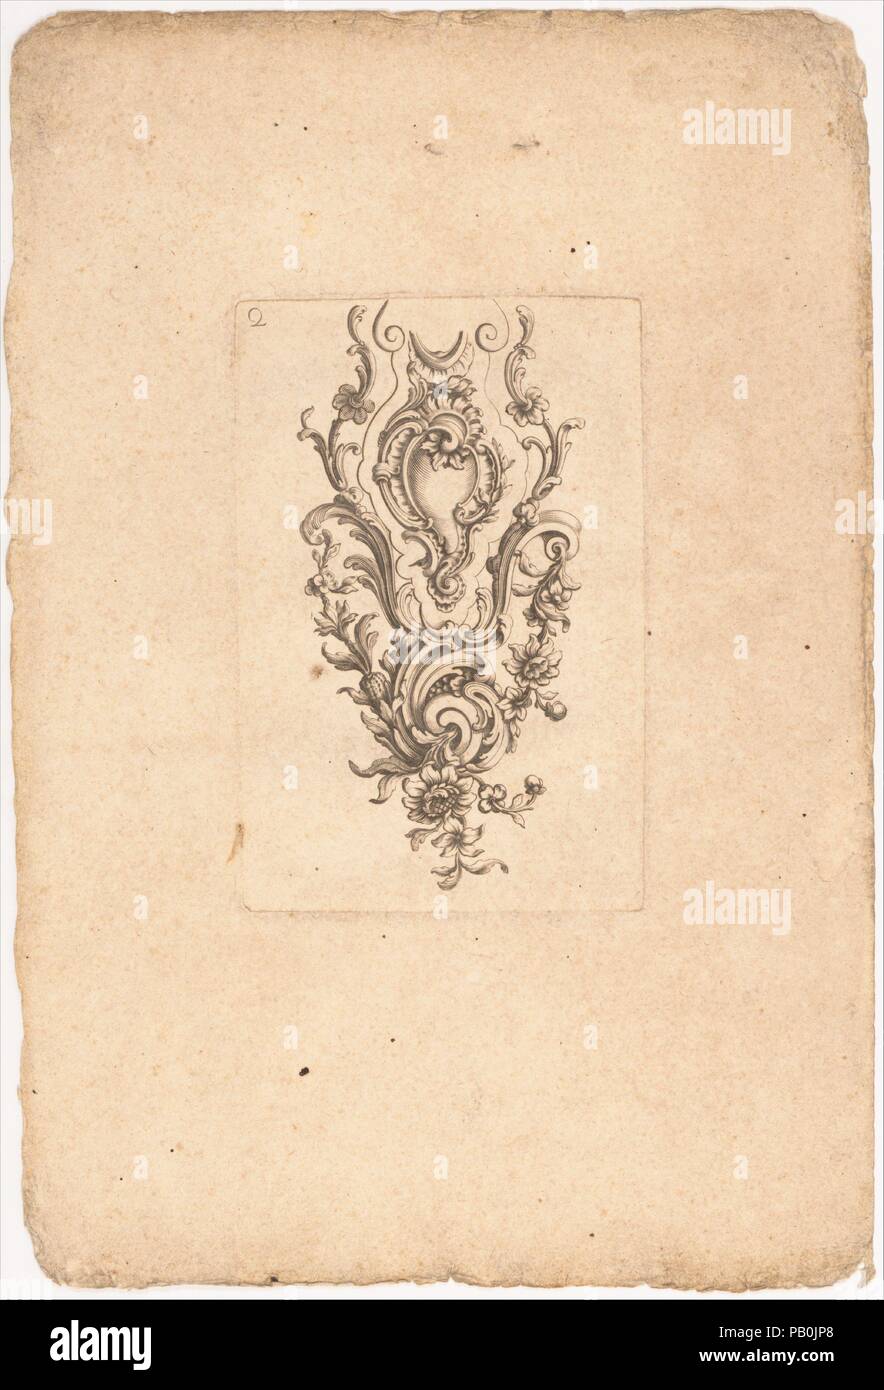 Nouveaux Ornemans D'Arquebuseries. Culture: French, Paris. Dimensions: 10 1/4  x 6 3/4 in. (26 x 17.1 cm). Engraver: Gilles Demarteau (French, Liège 1722-1776 Paris). Date: ca. 1750-55.  Demarteau, the son of a Liege gunsmith, was apprenticed under the Parisian engraver De Lacollombe, who is known chiefly for his designs for firearms ornament. These prints, part of a set of nineteen, come from Demarteau's only pattern book devoted solely to firearms decoration. From the 1750s onward, Demarteau established himself as one of the most successful engravers of his generation and was renowned for pe Stock Photo